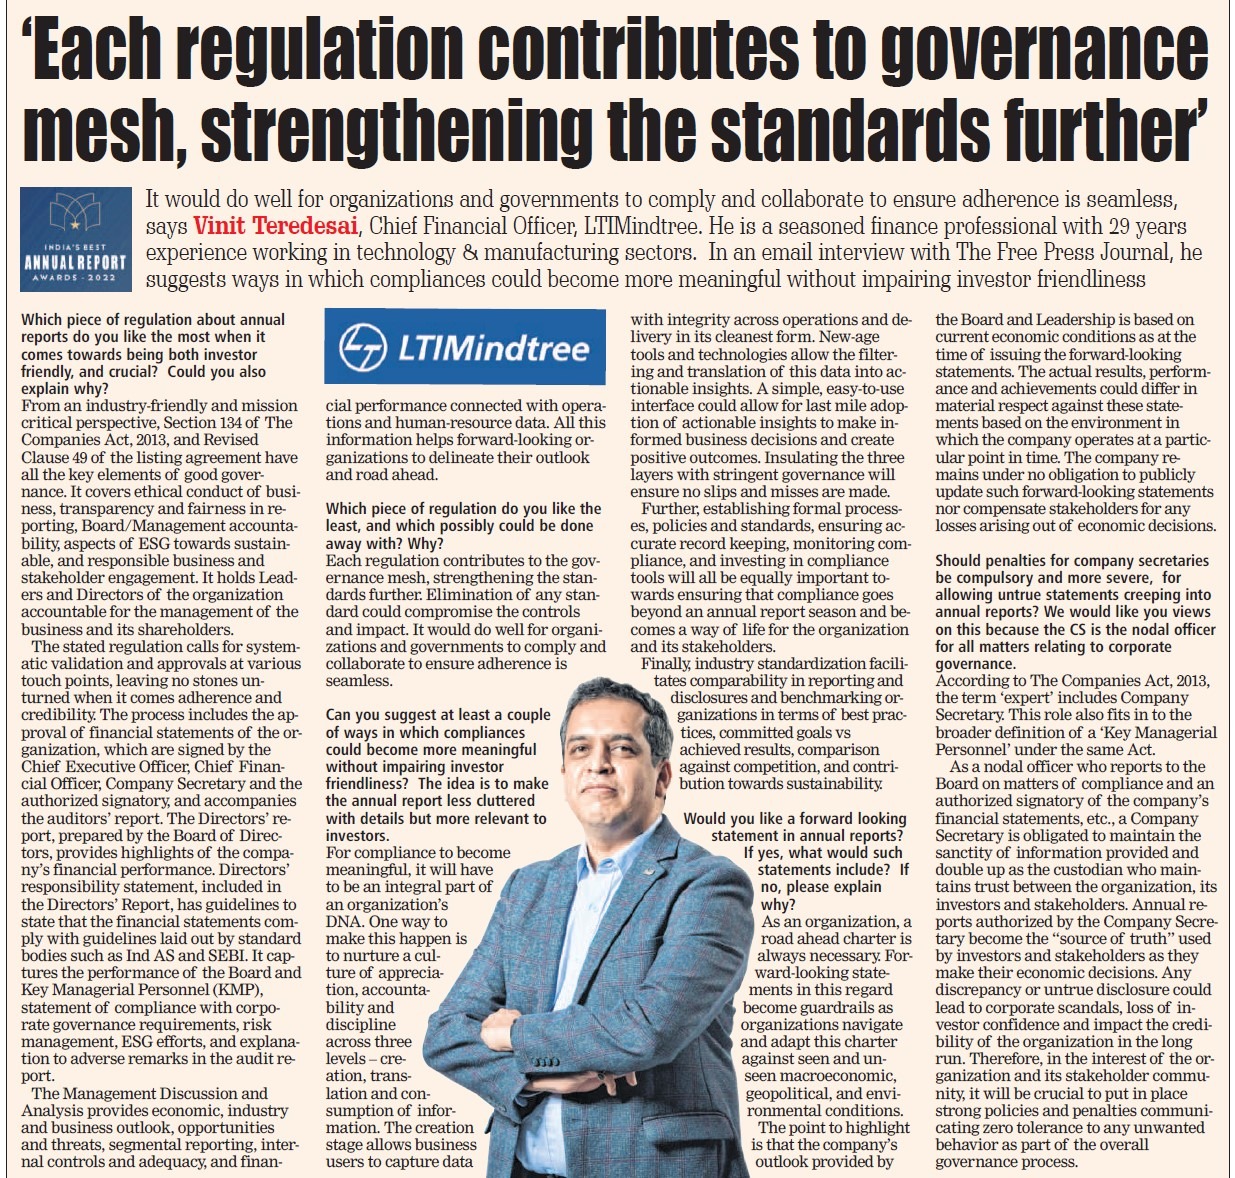 Each regulation contributes to governance